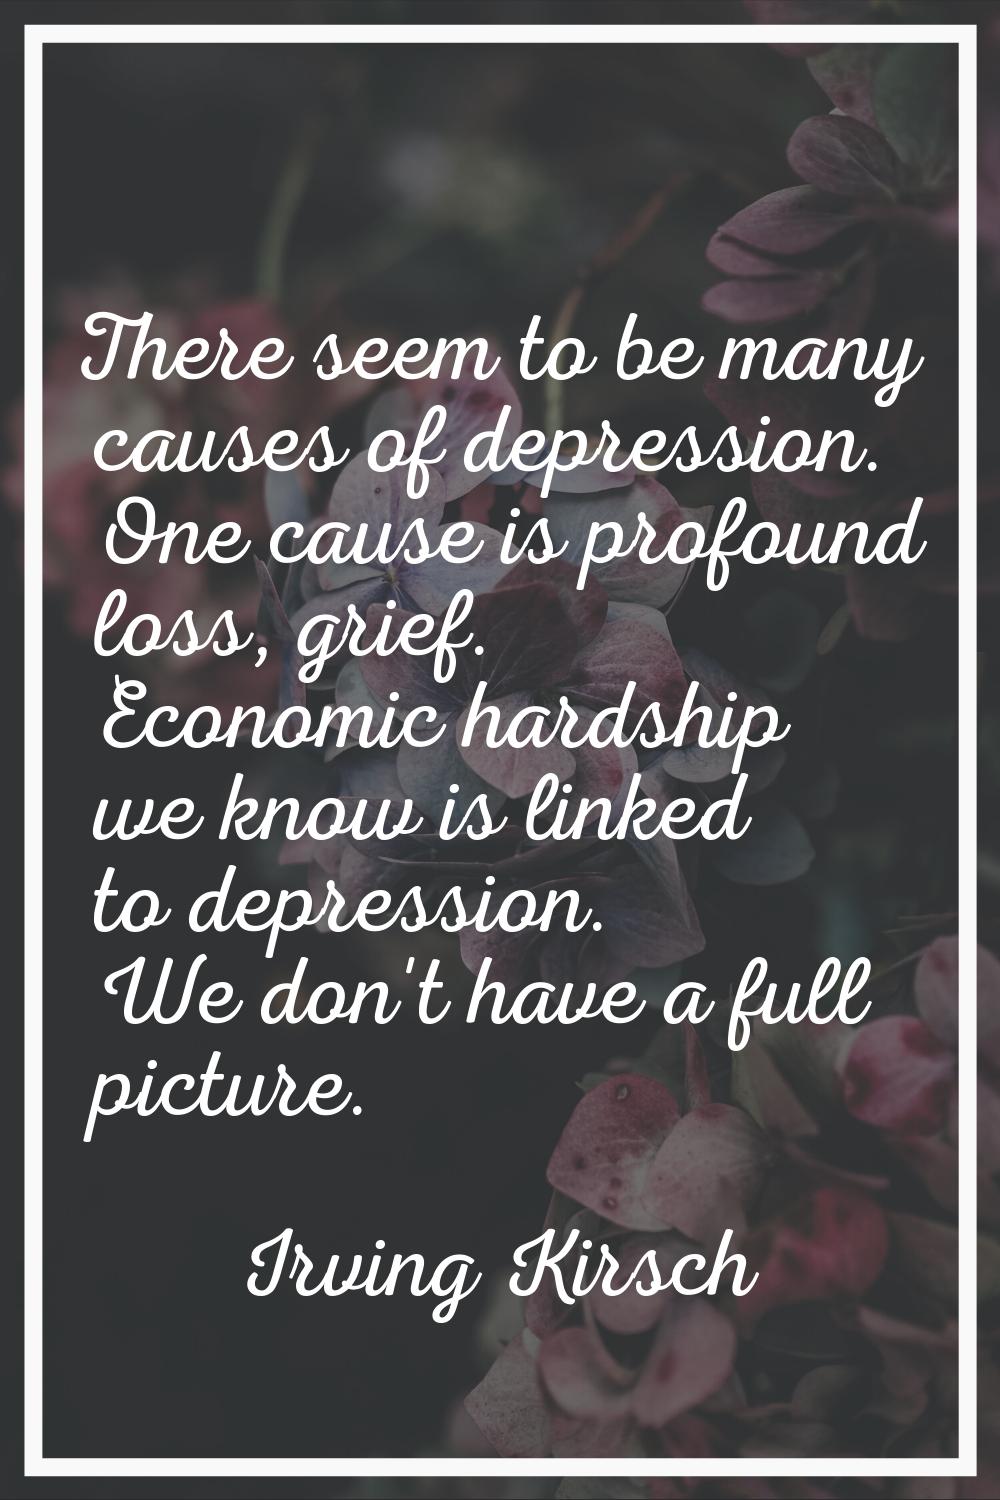 There seem to be many causes of depression. One cause is profound loss, grief. Economic hardship we